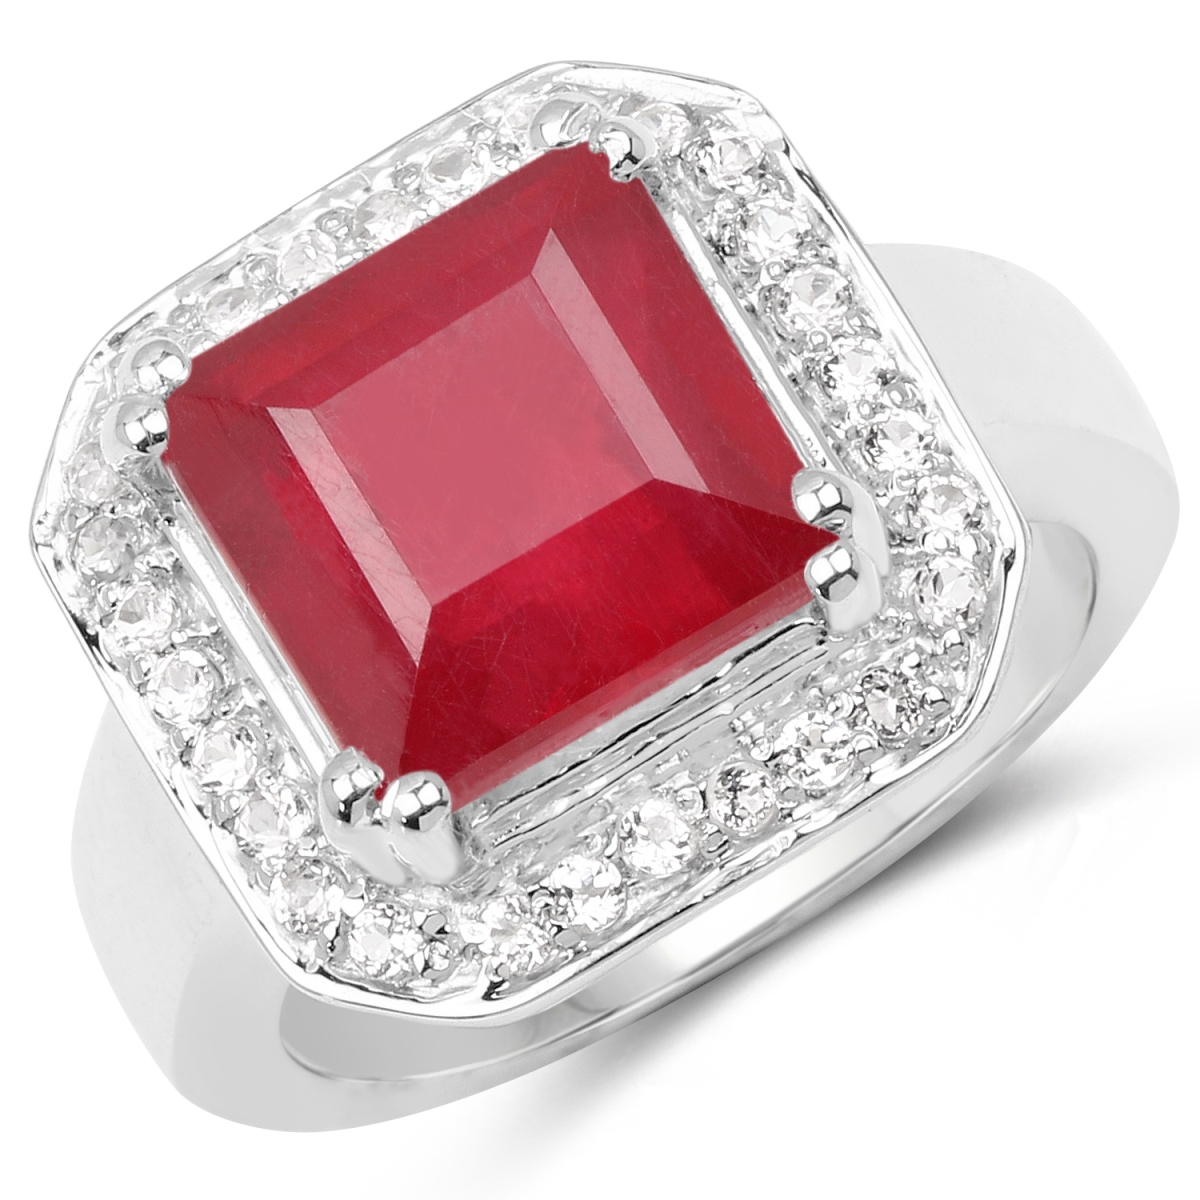 Picture of Malaika QR3820R-SSR-6 6.36 Carat Glass Filled Ruby & White Topaz 0.925 Sterling Silver Ring